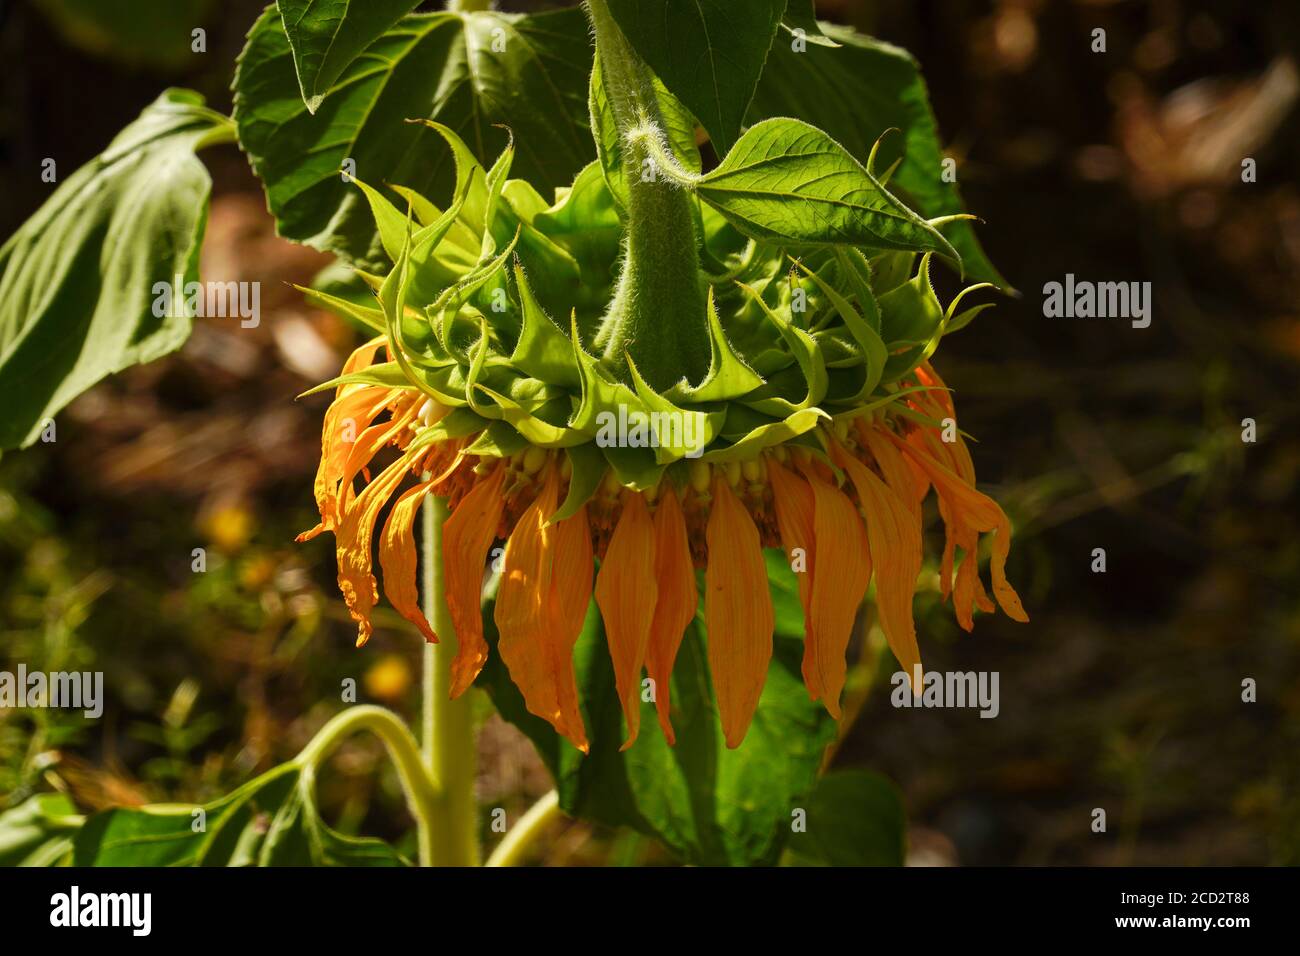 Close up of a flowering yellow sunflower in an agricultural field. Photographed in Israel in June Stock Photo